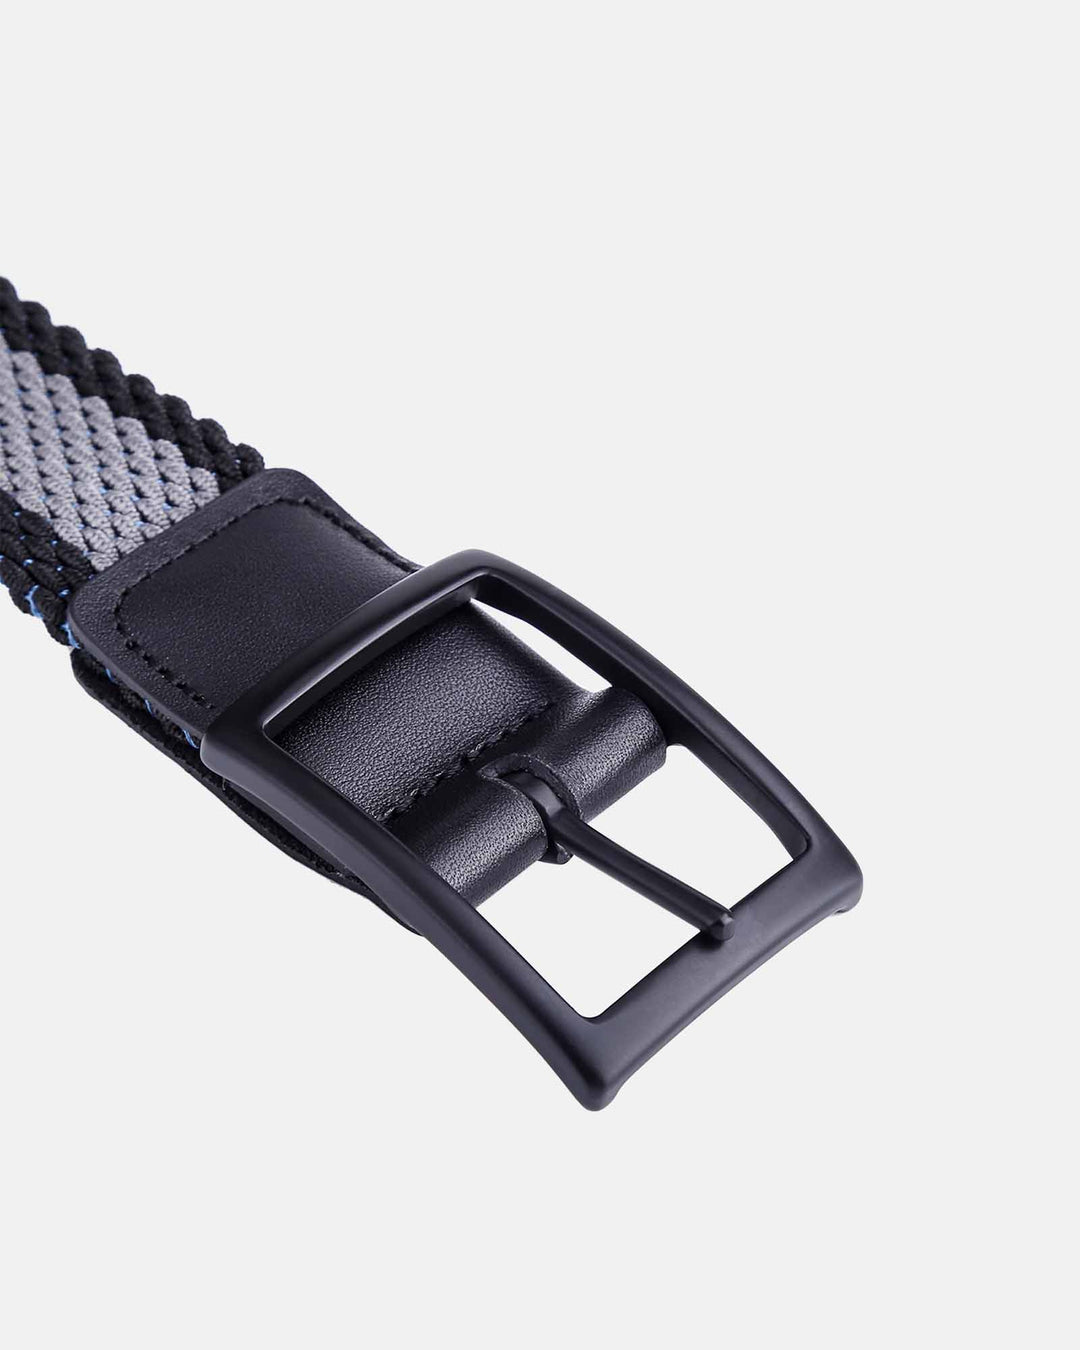 Ghost Golf Grey/Black Belt with matching Black Buckle